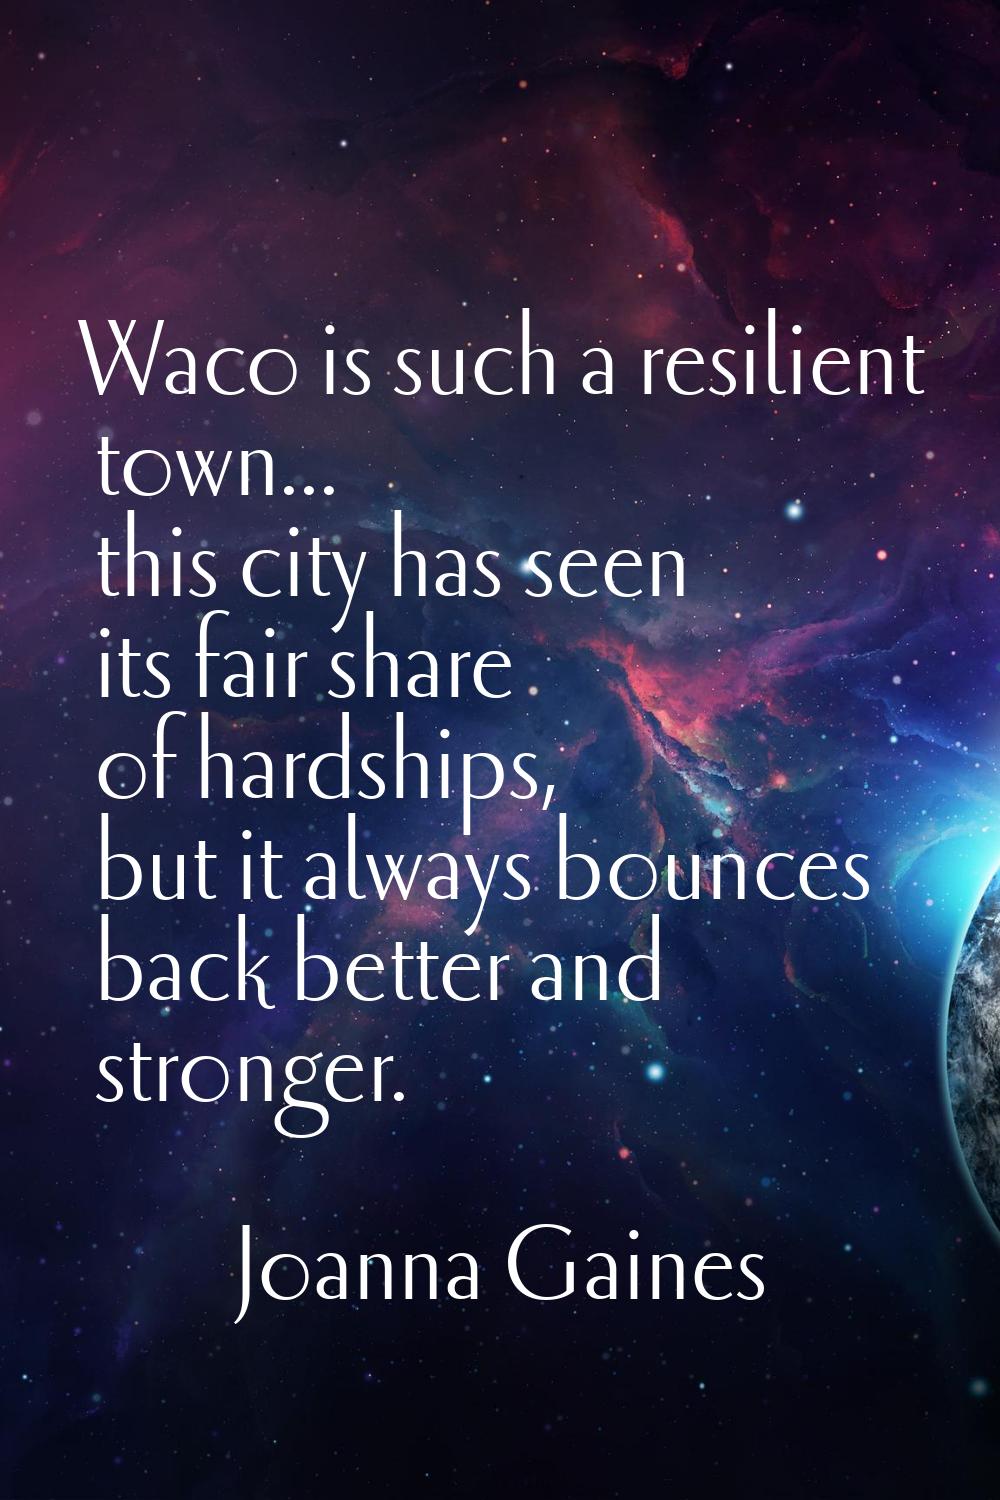 Waco is such a resilient town... this city has seen its fair share of hardships, but it always boun